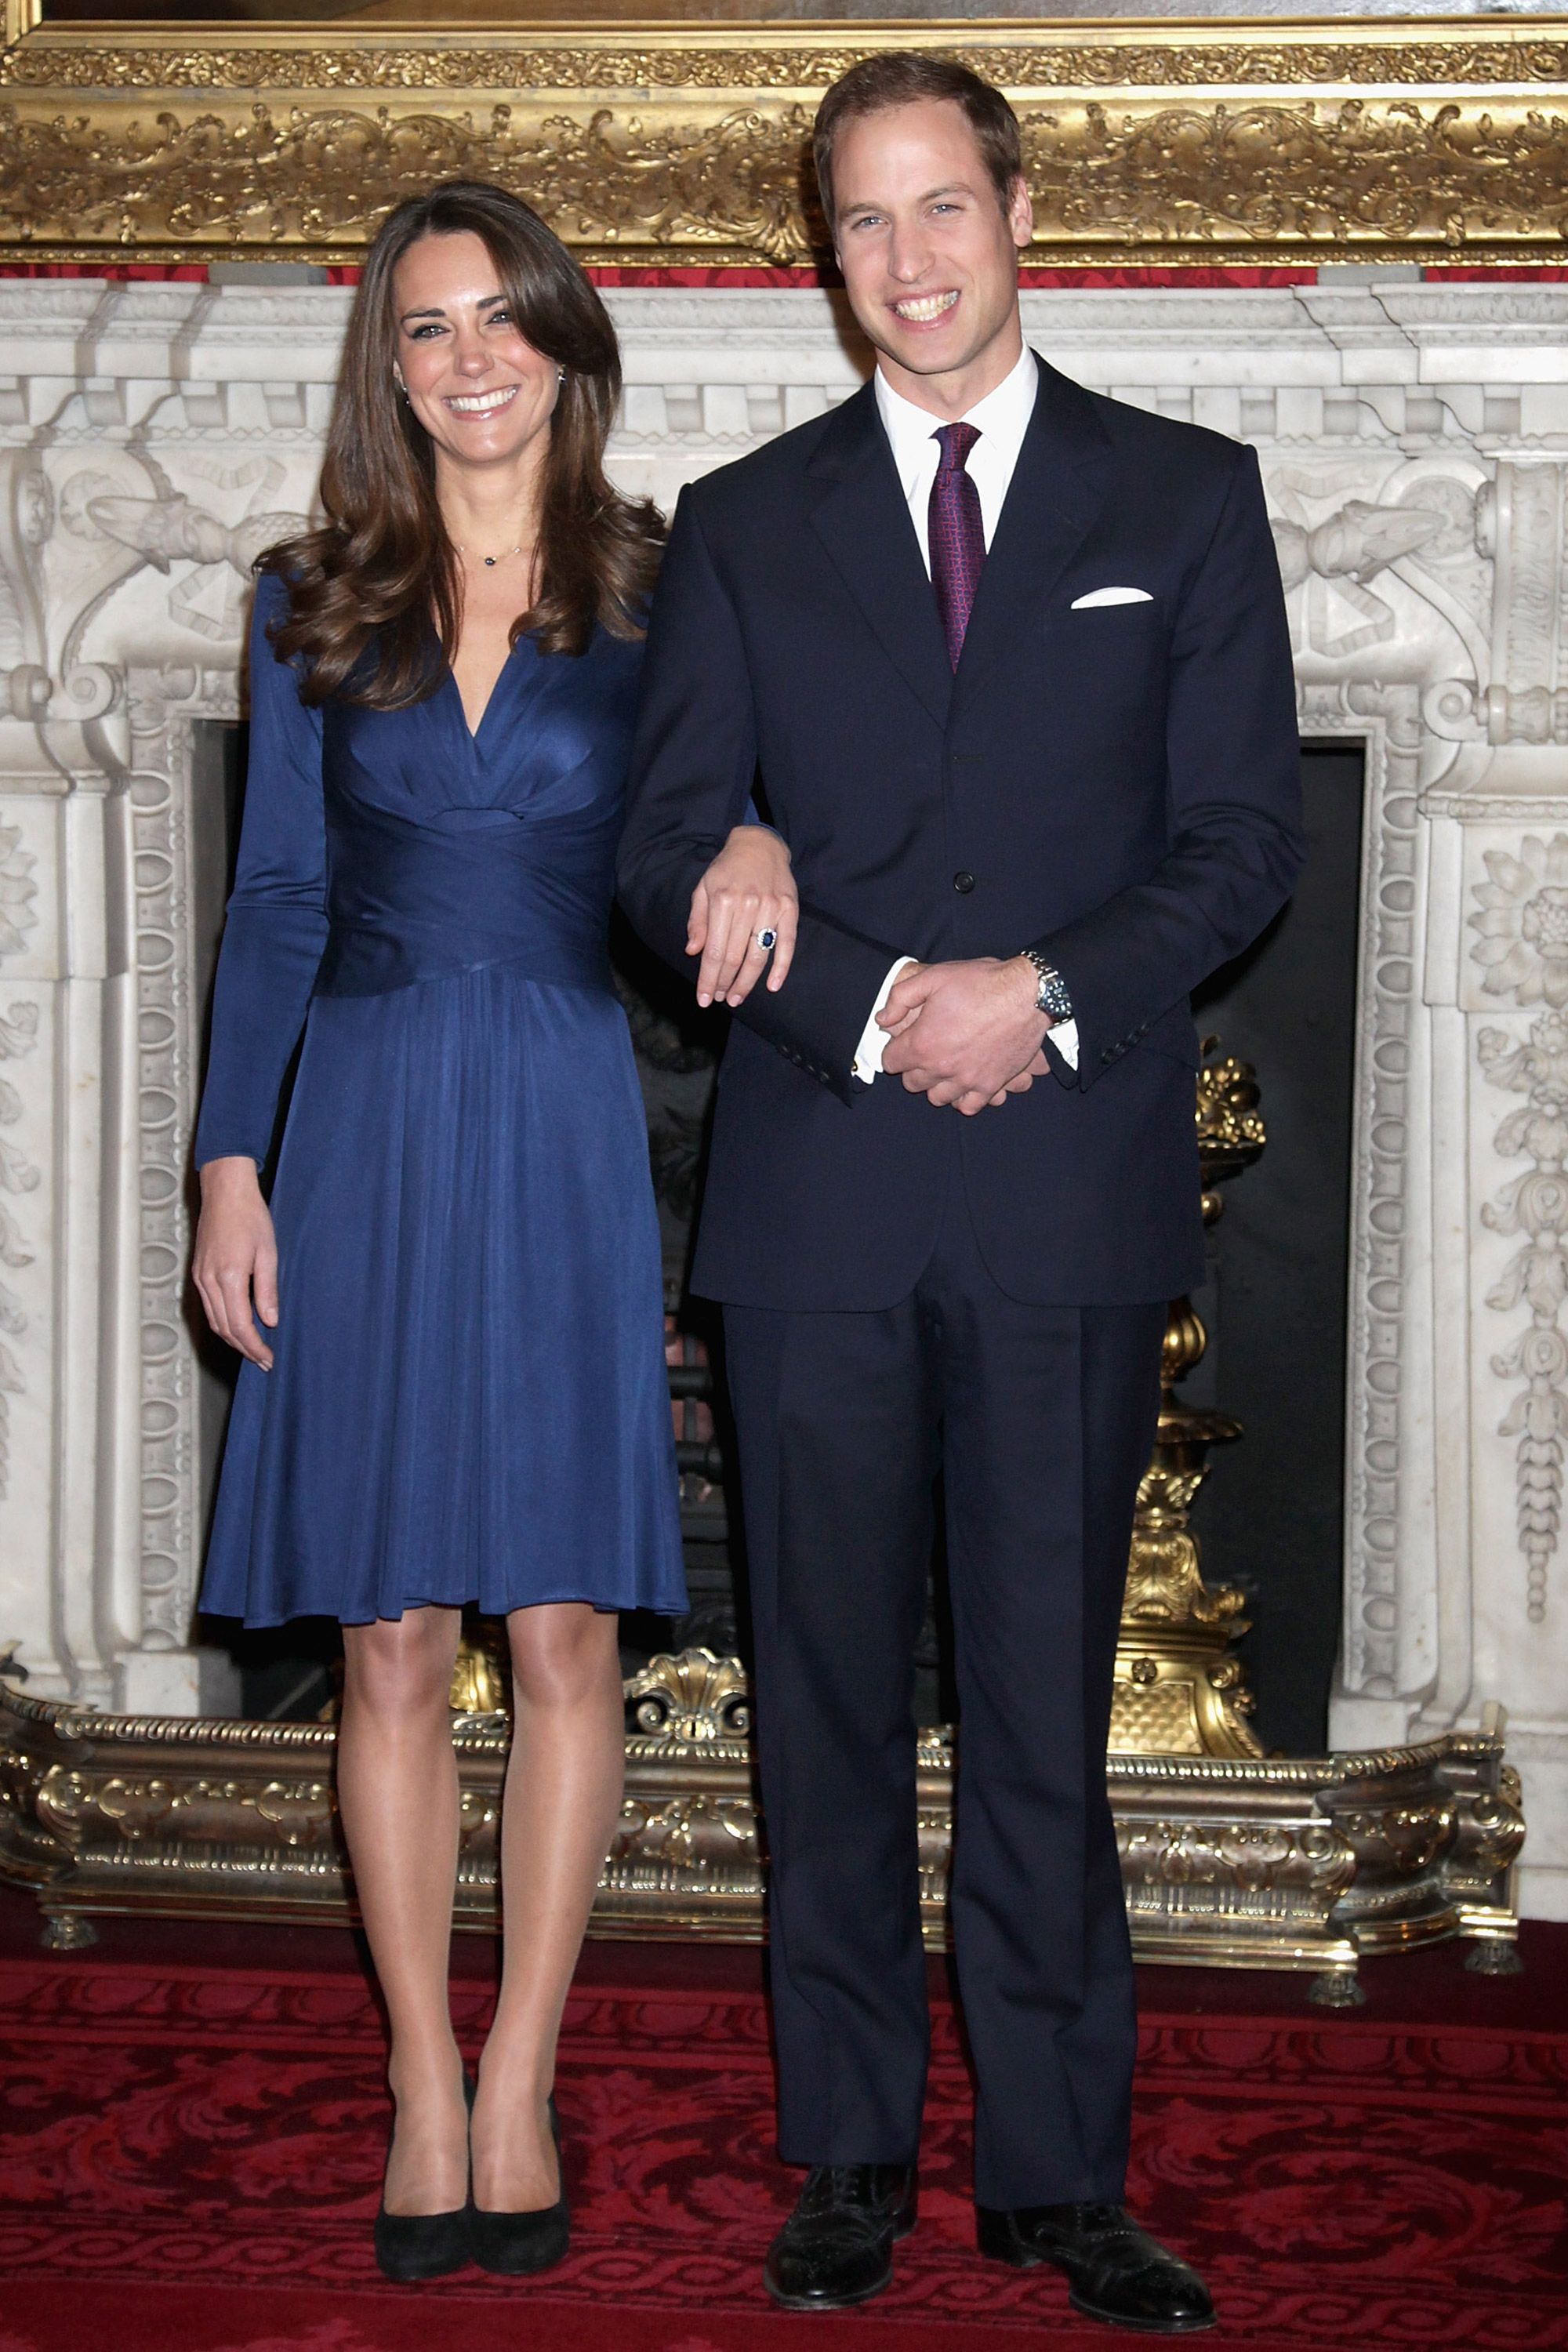 Kate Middleton's 'challenges' with £390k engagement ring - exclusive |  HELLO!